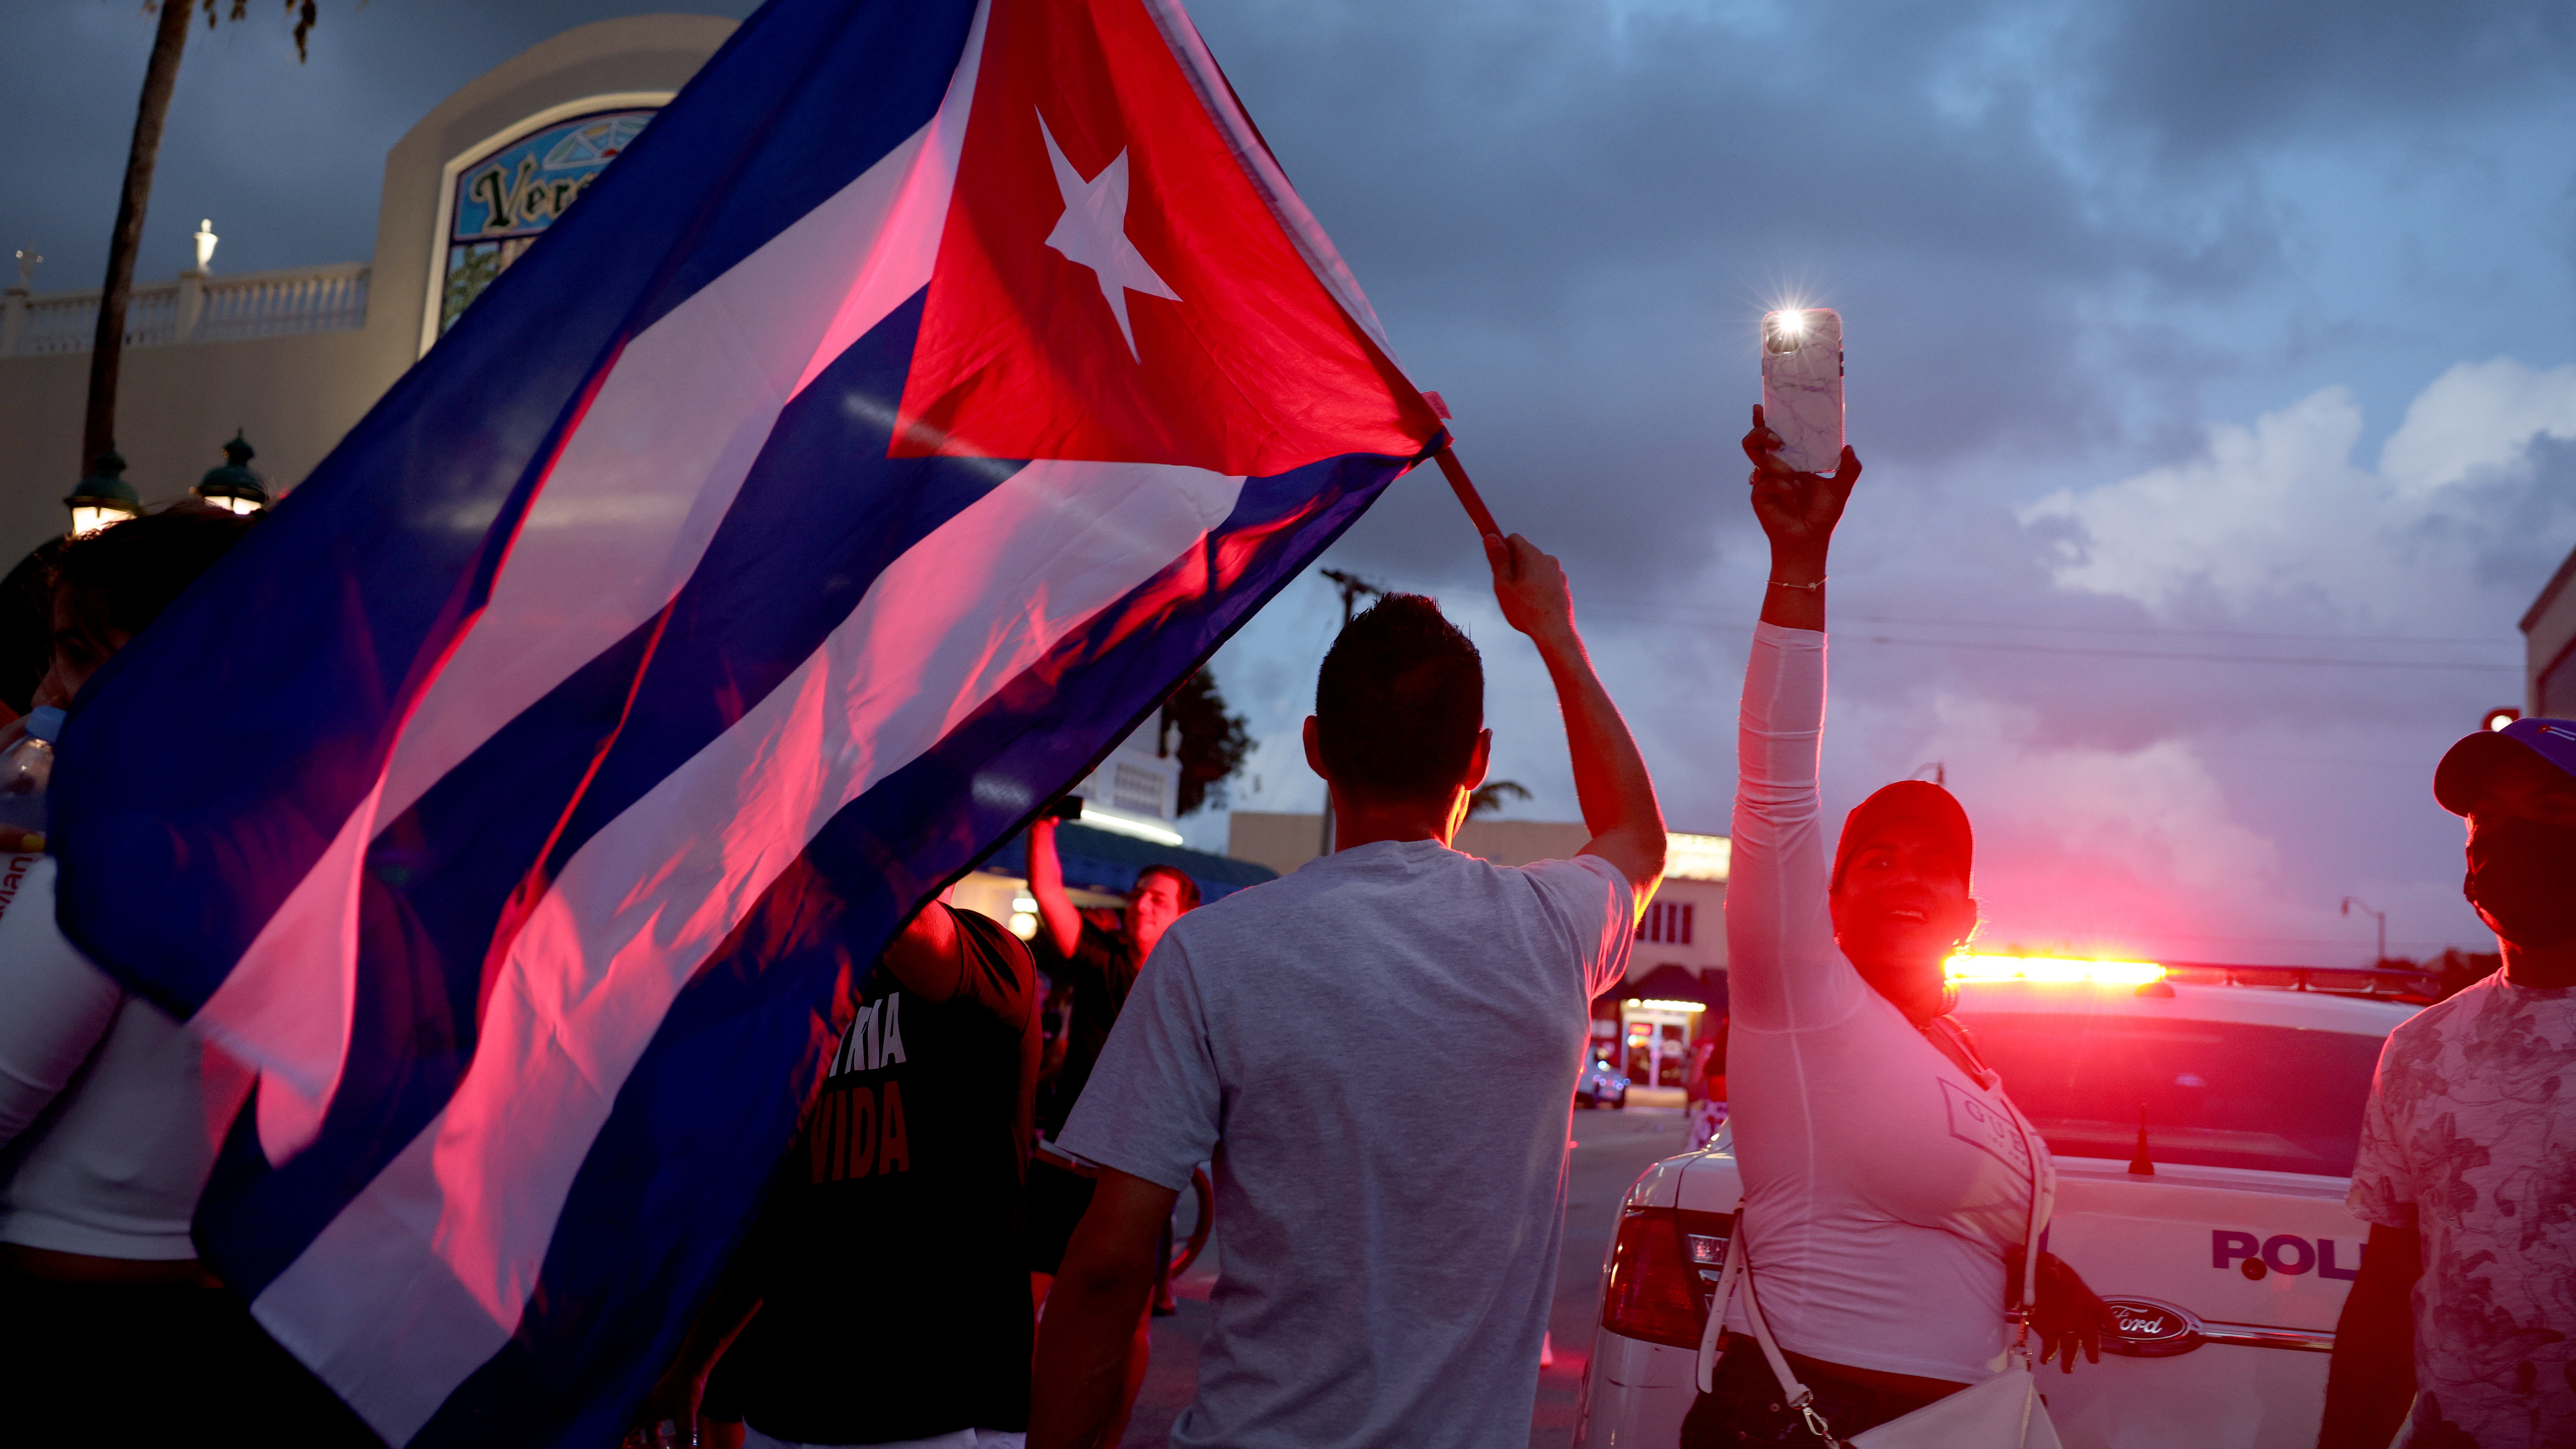 Protesters gather in Miami, Florida in solidarity with Cubans